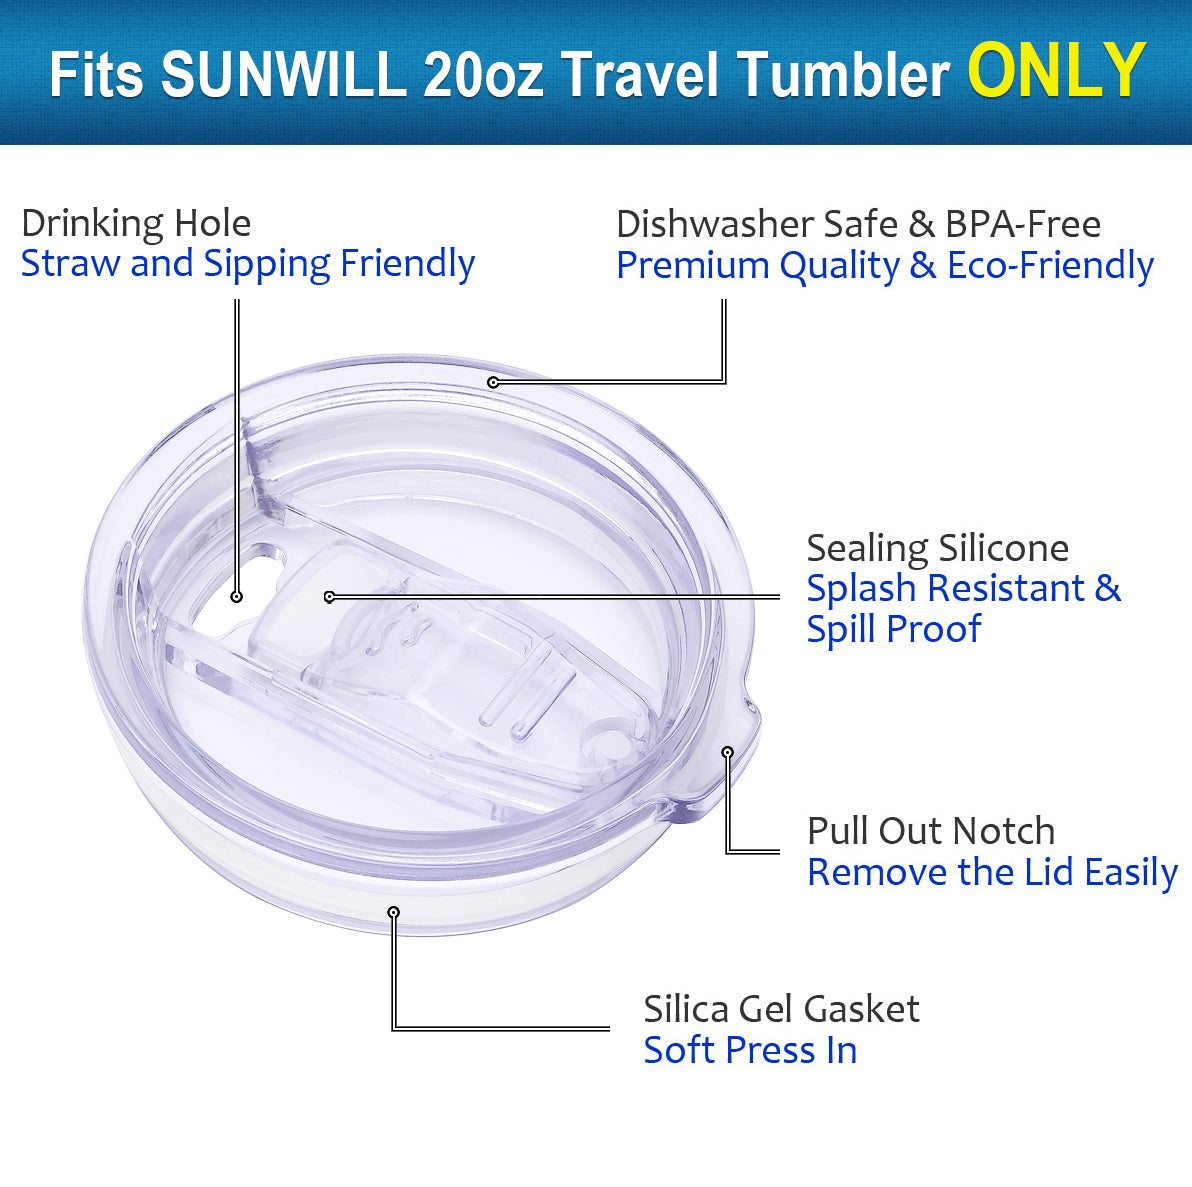 Spill Proof and Splash Resistant Silicone Sliding Lid for 20oz Travel Tumblers